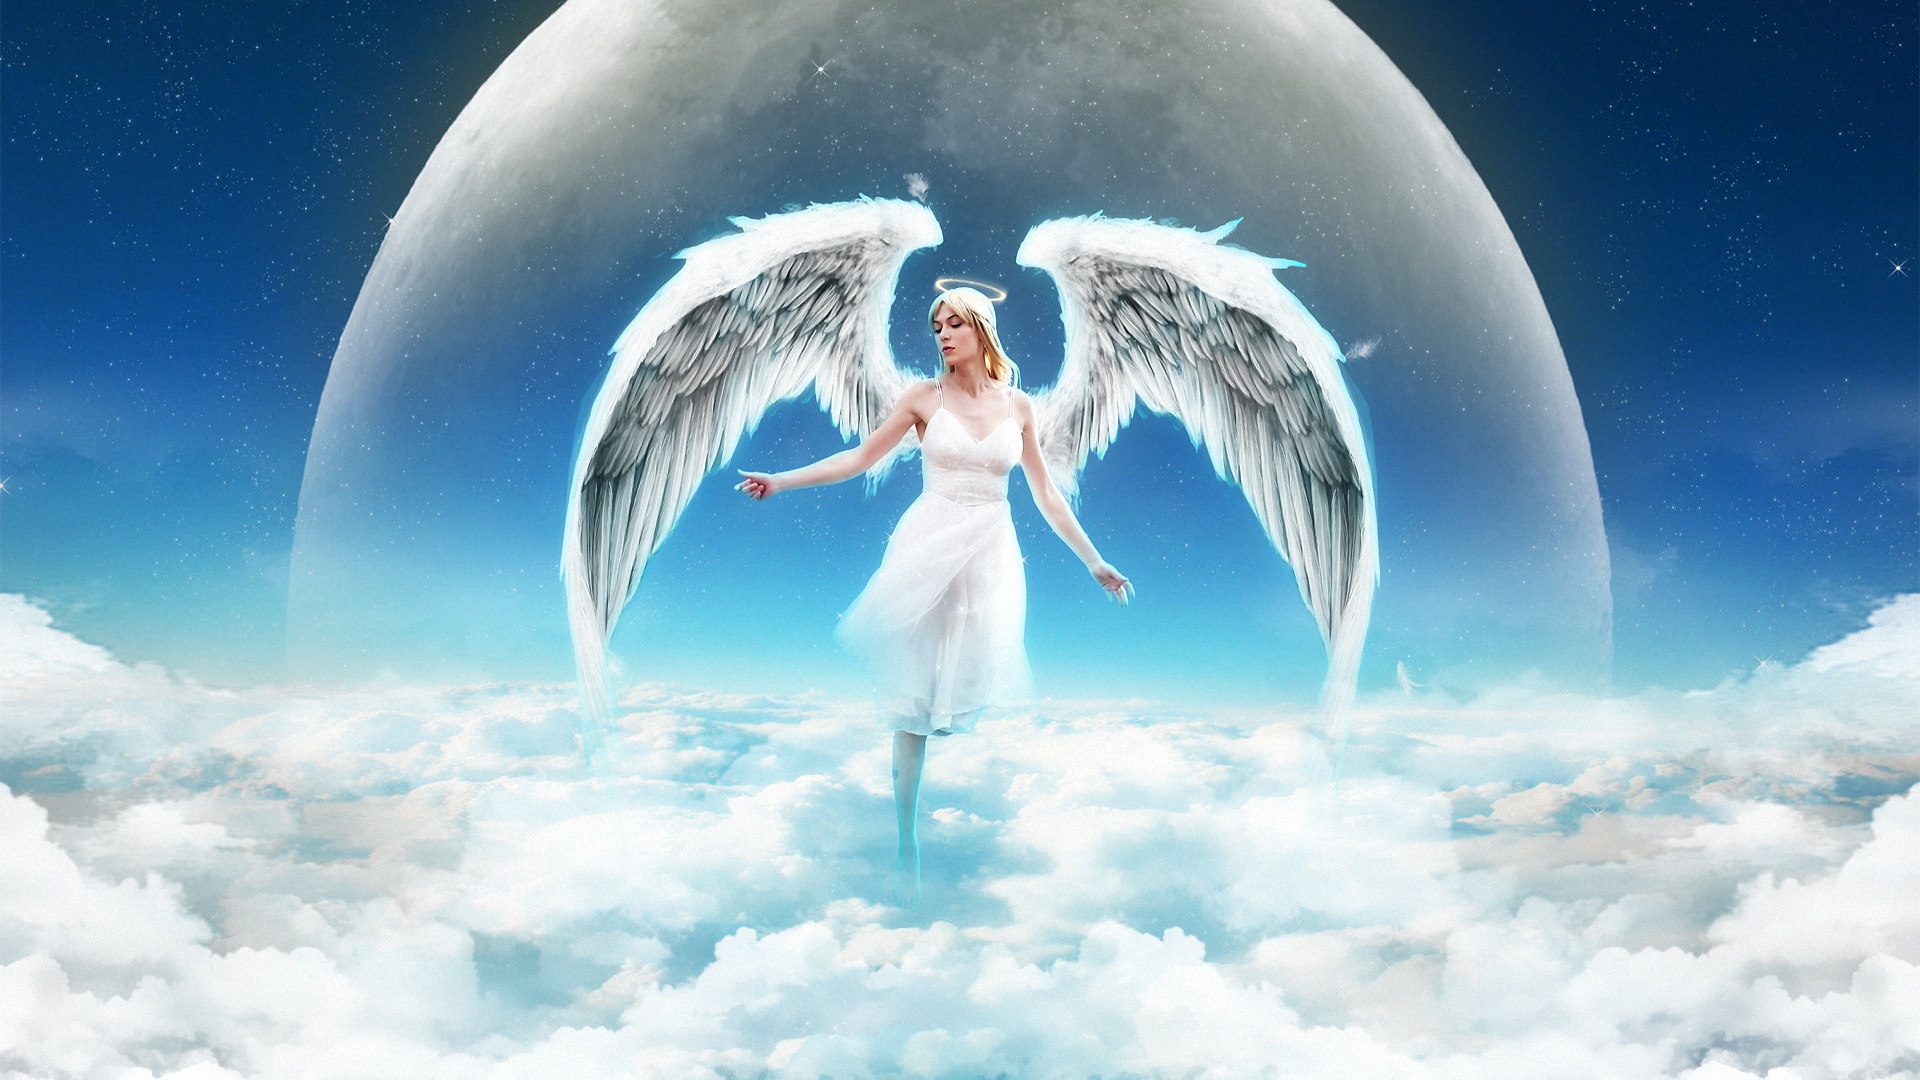 Wallpaper Angel girl on the sky, clouds 1920x1080 Full HD 2K Picture, Image